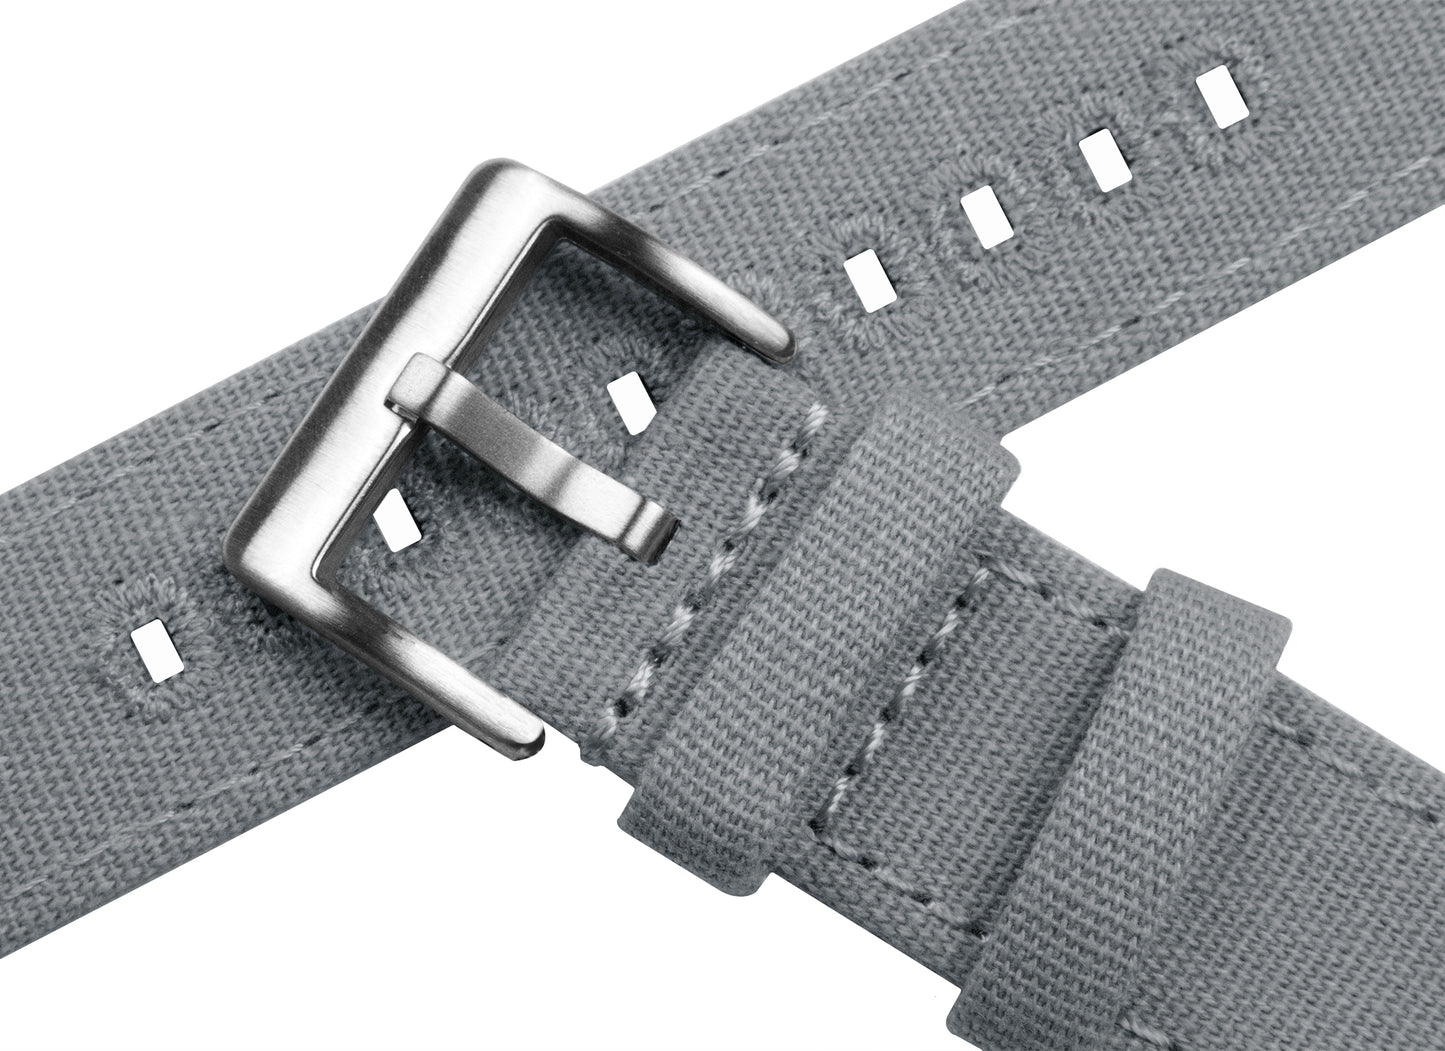 Fossil Q | Cool Grey Canvas - Barton Watch Bands